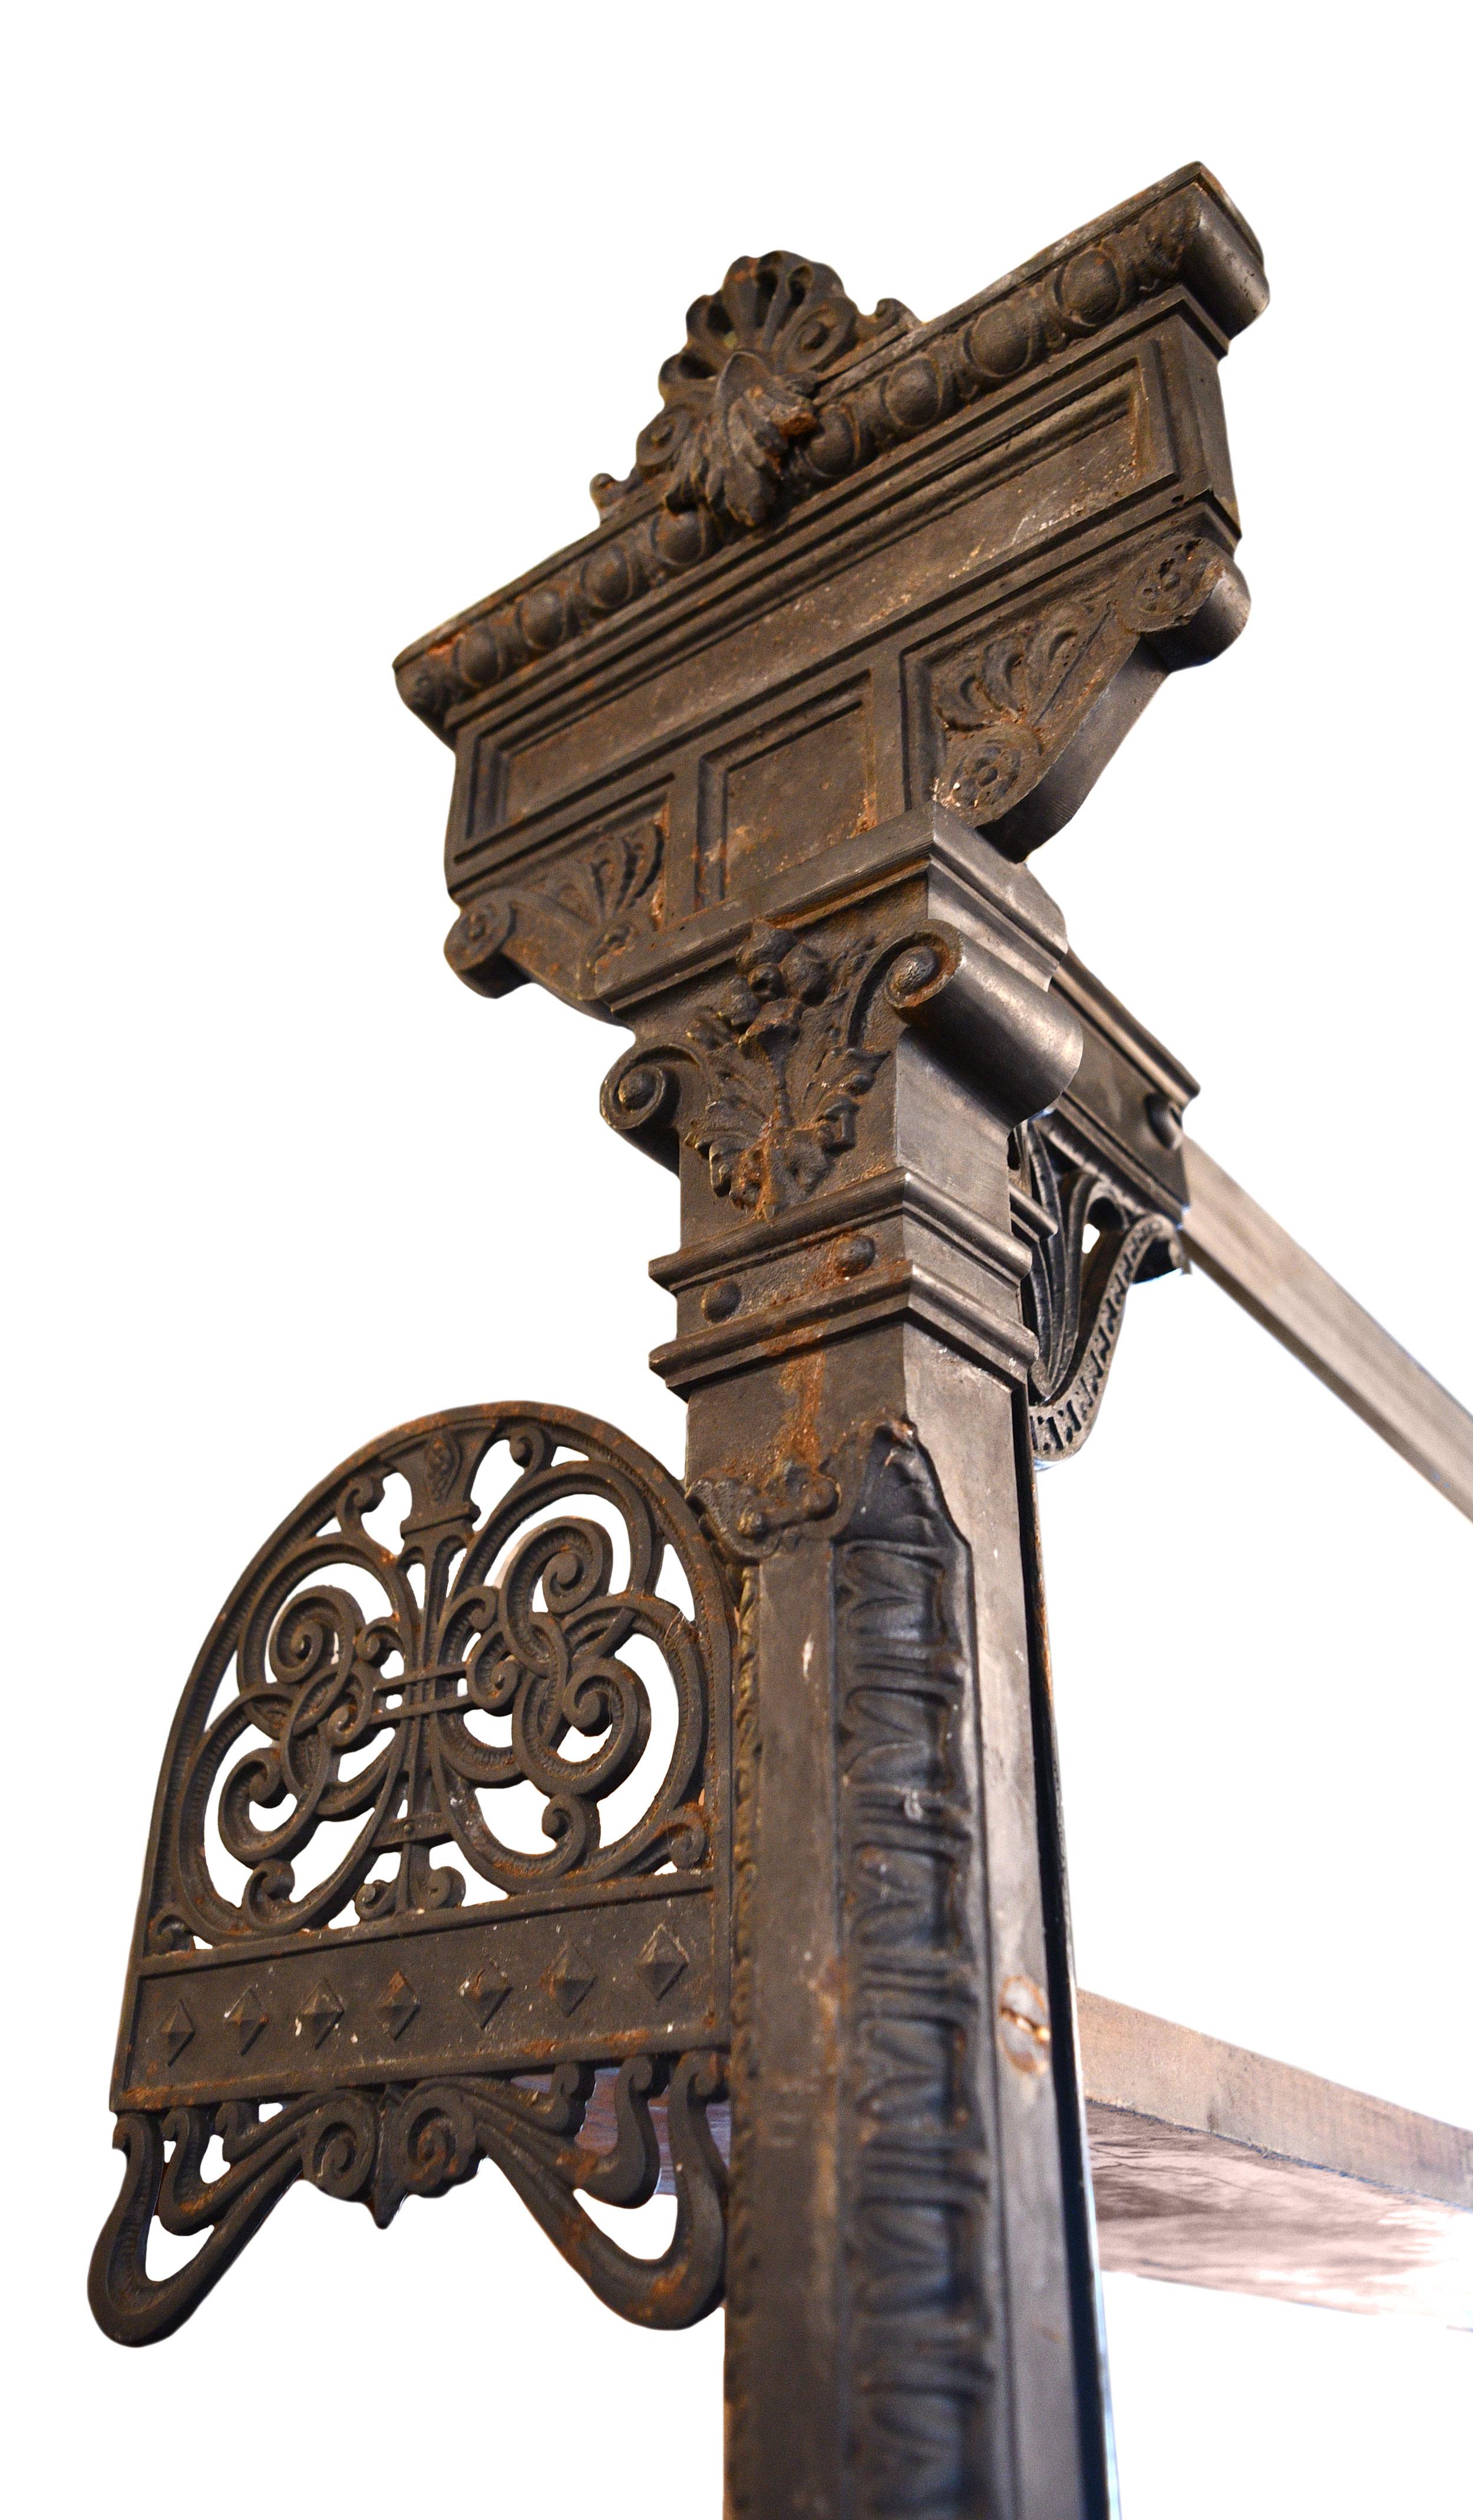 While these brackets look at first glance to be an Art Nouveau, details in the piece reveal it to also be designed with Ionic style elements. Lamb’s tongue detailing runs up along the length of the upright ends. The Ionic column-like portion